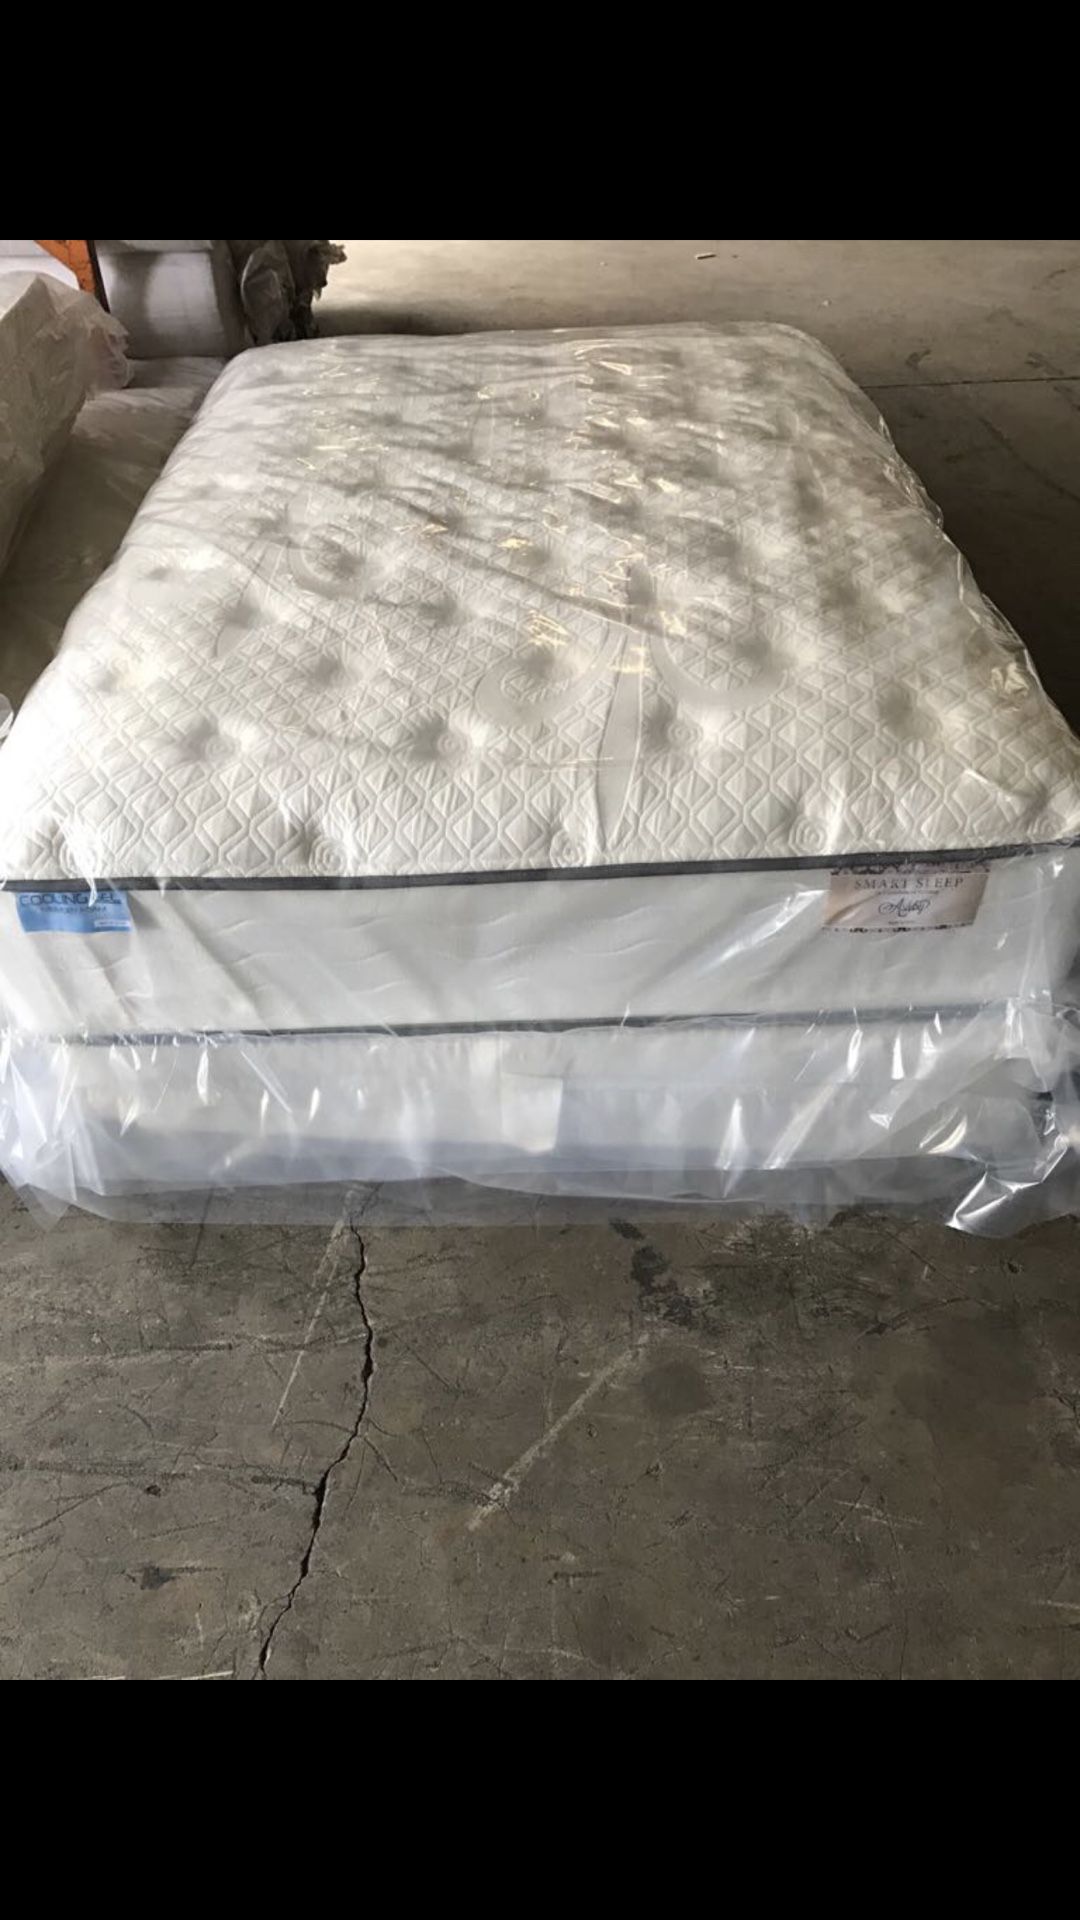 Delivery free new mattress in the plastic